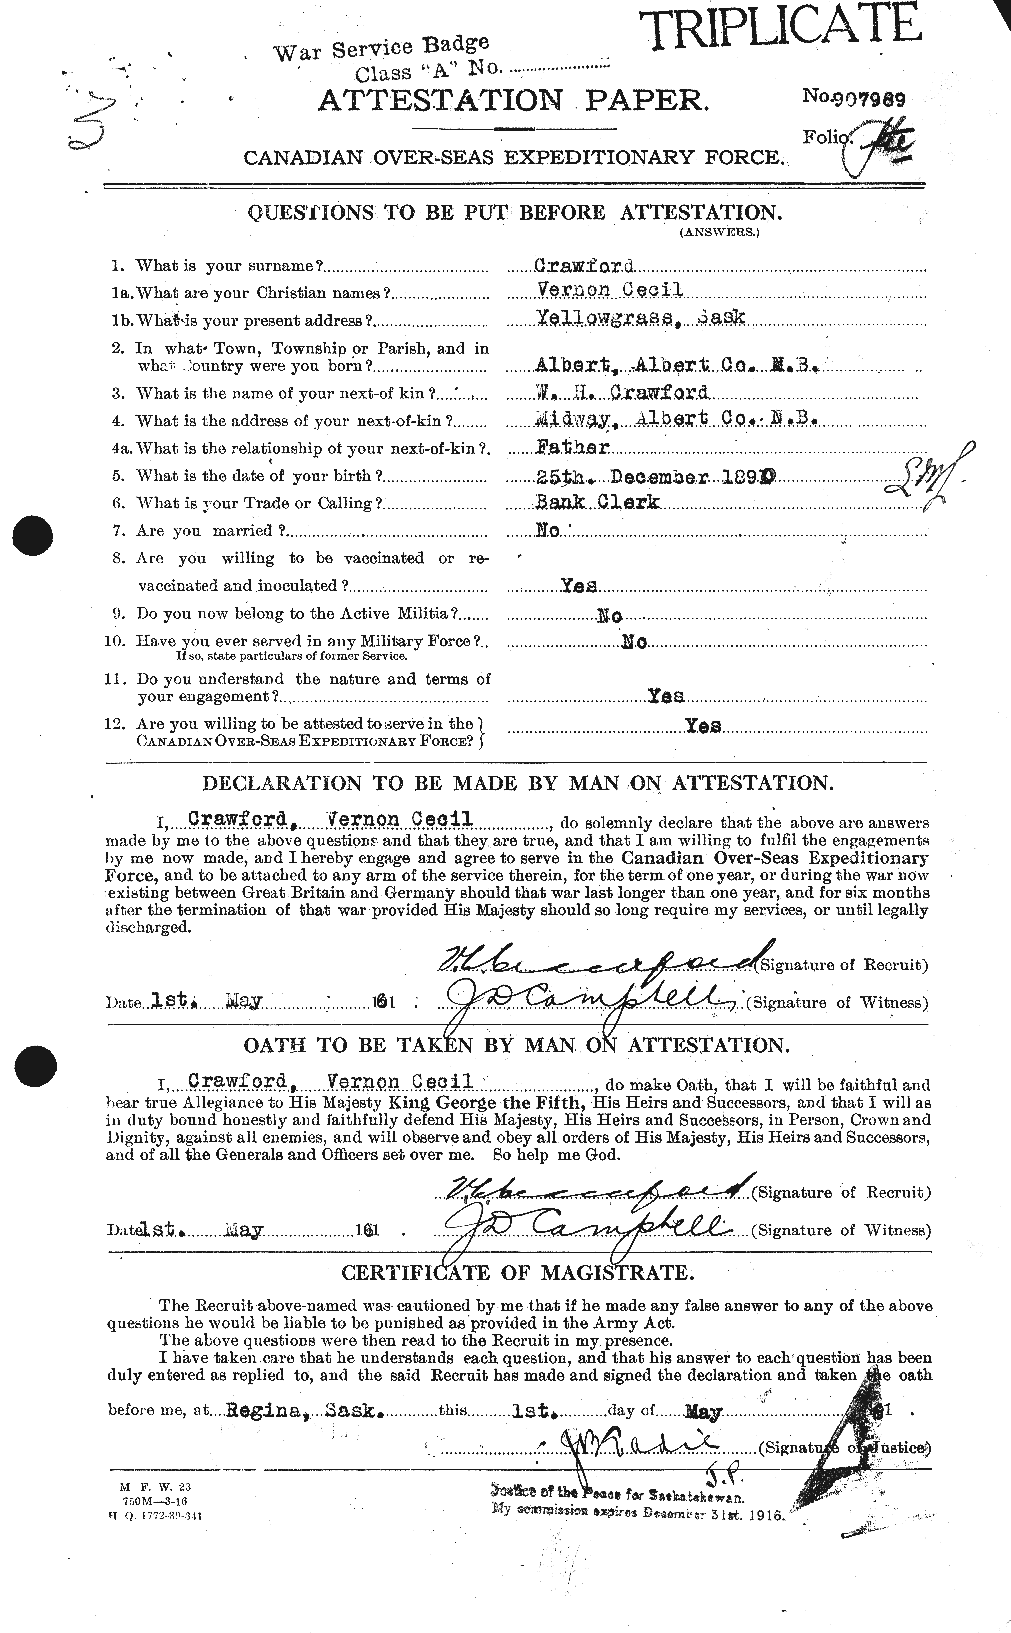 Personnel Records of the First World War - CEF 061181a